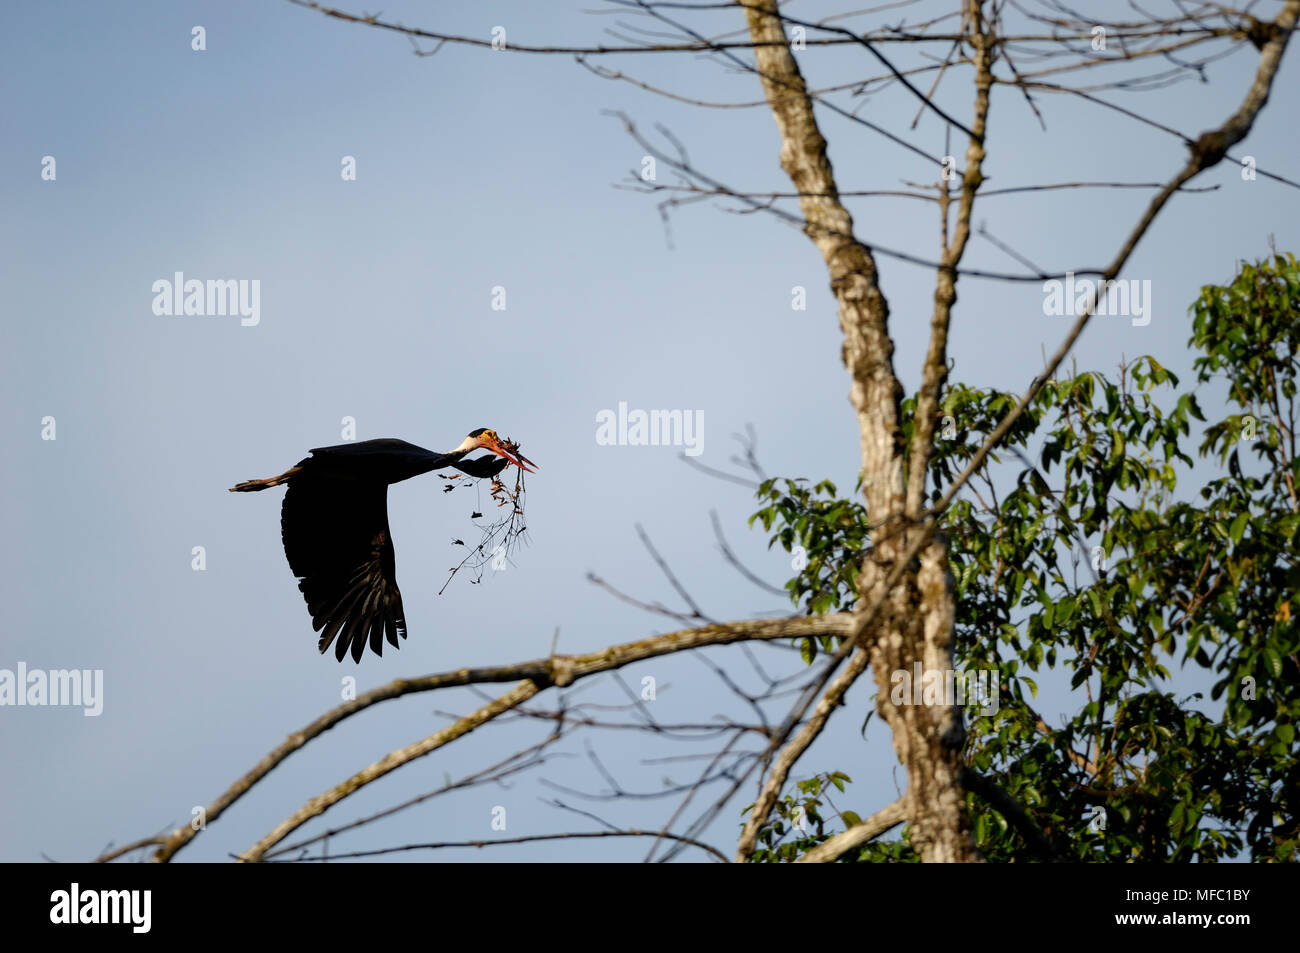 STORM STORK Ciconia stormi carrying nesting material Borneo Stock Photo